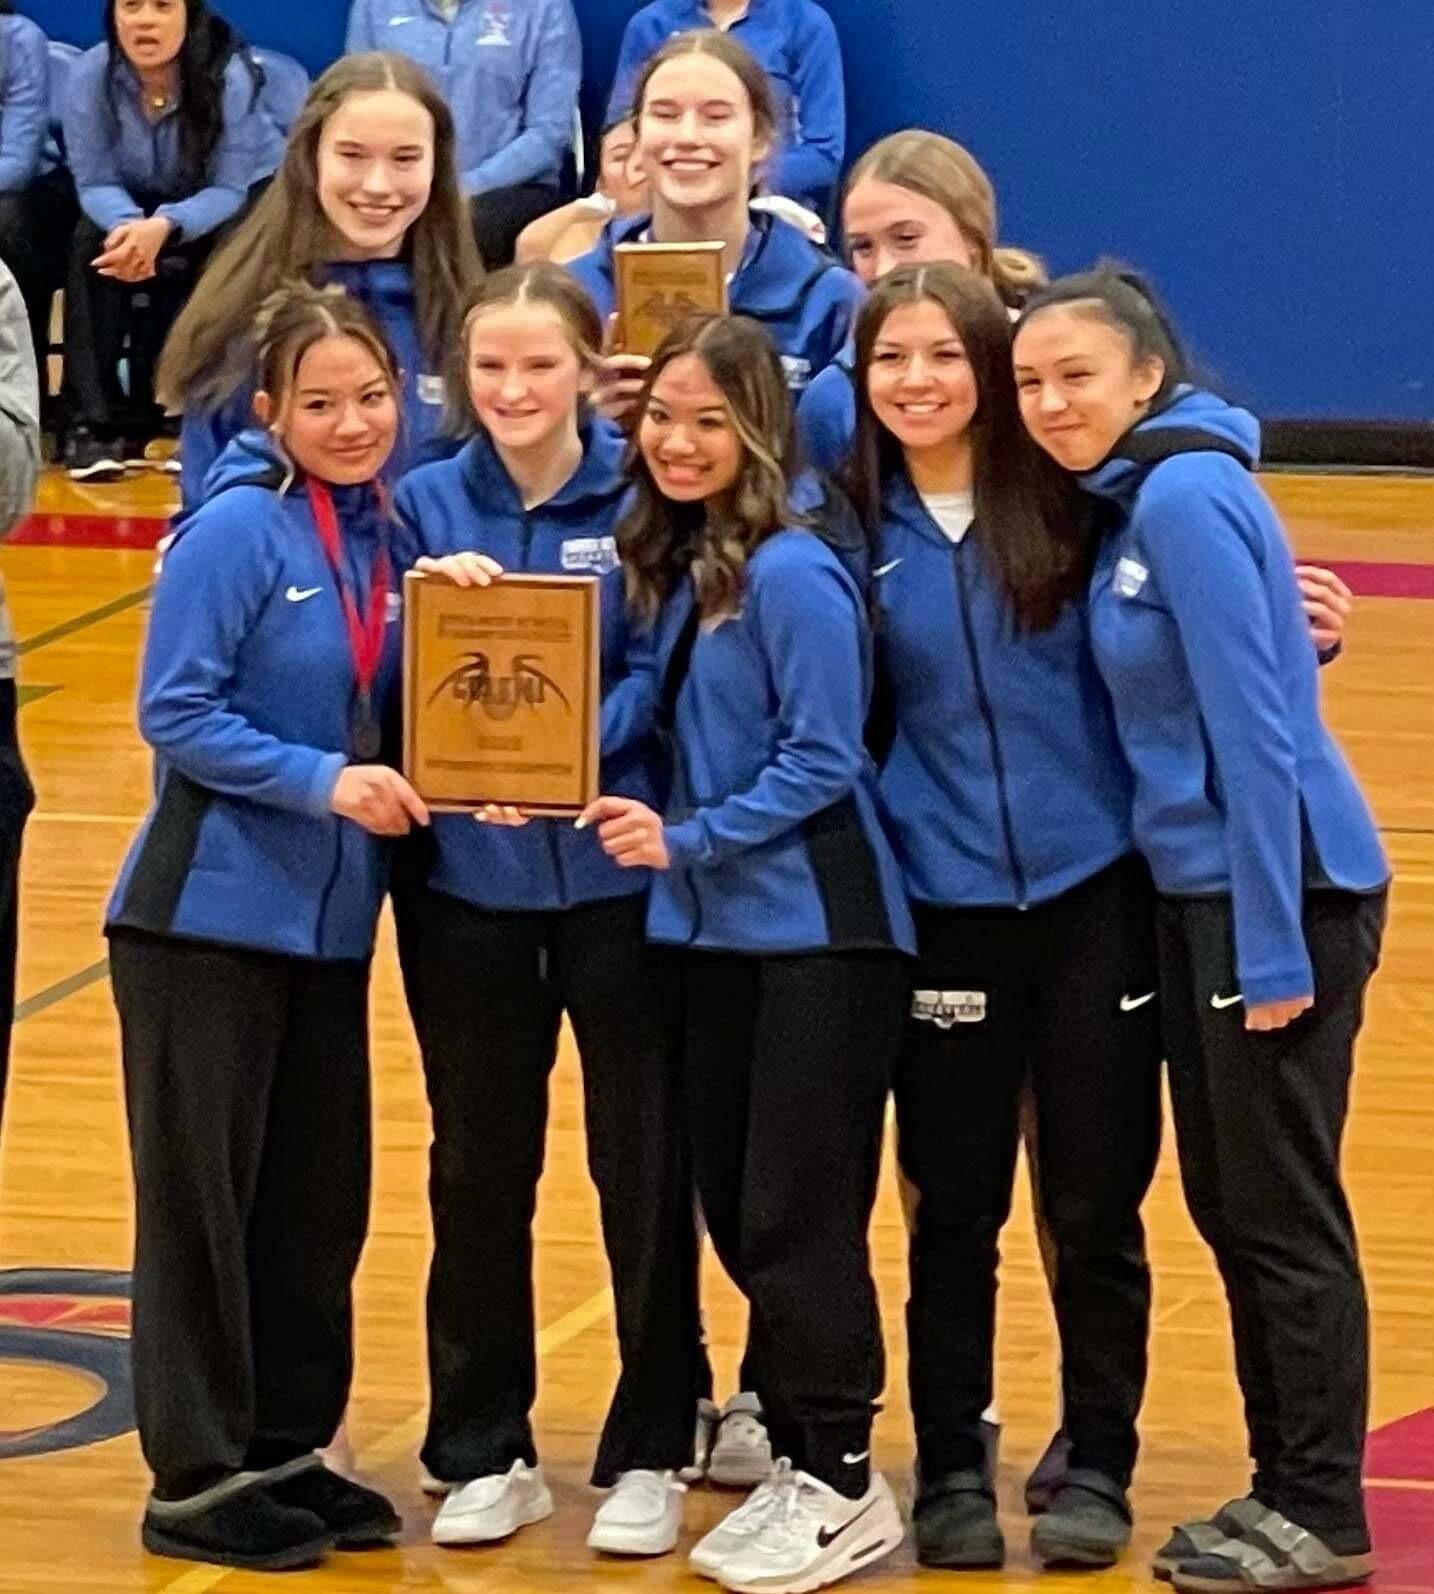 The Thunder Mountain High School girls basketball team poses for a photo with a plaque after winning the Sitka Coastal Holiday Classic tournament. (Courtesy Photo)